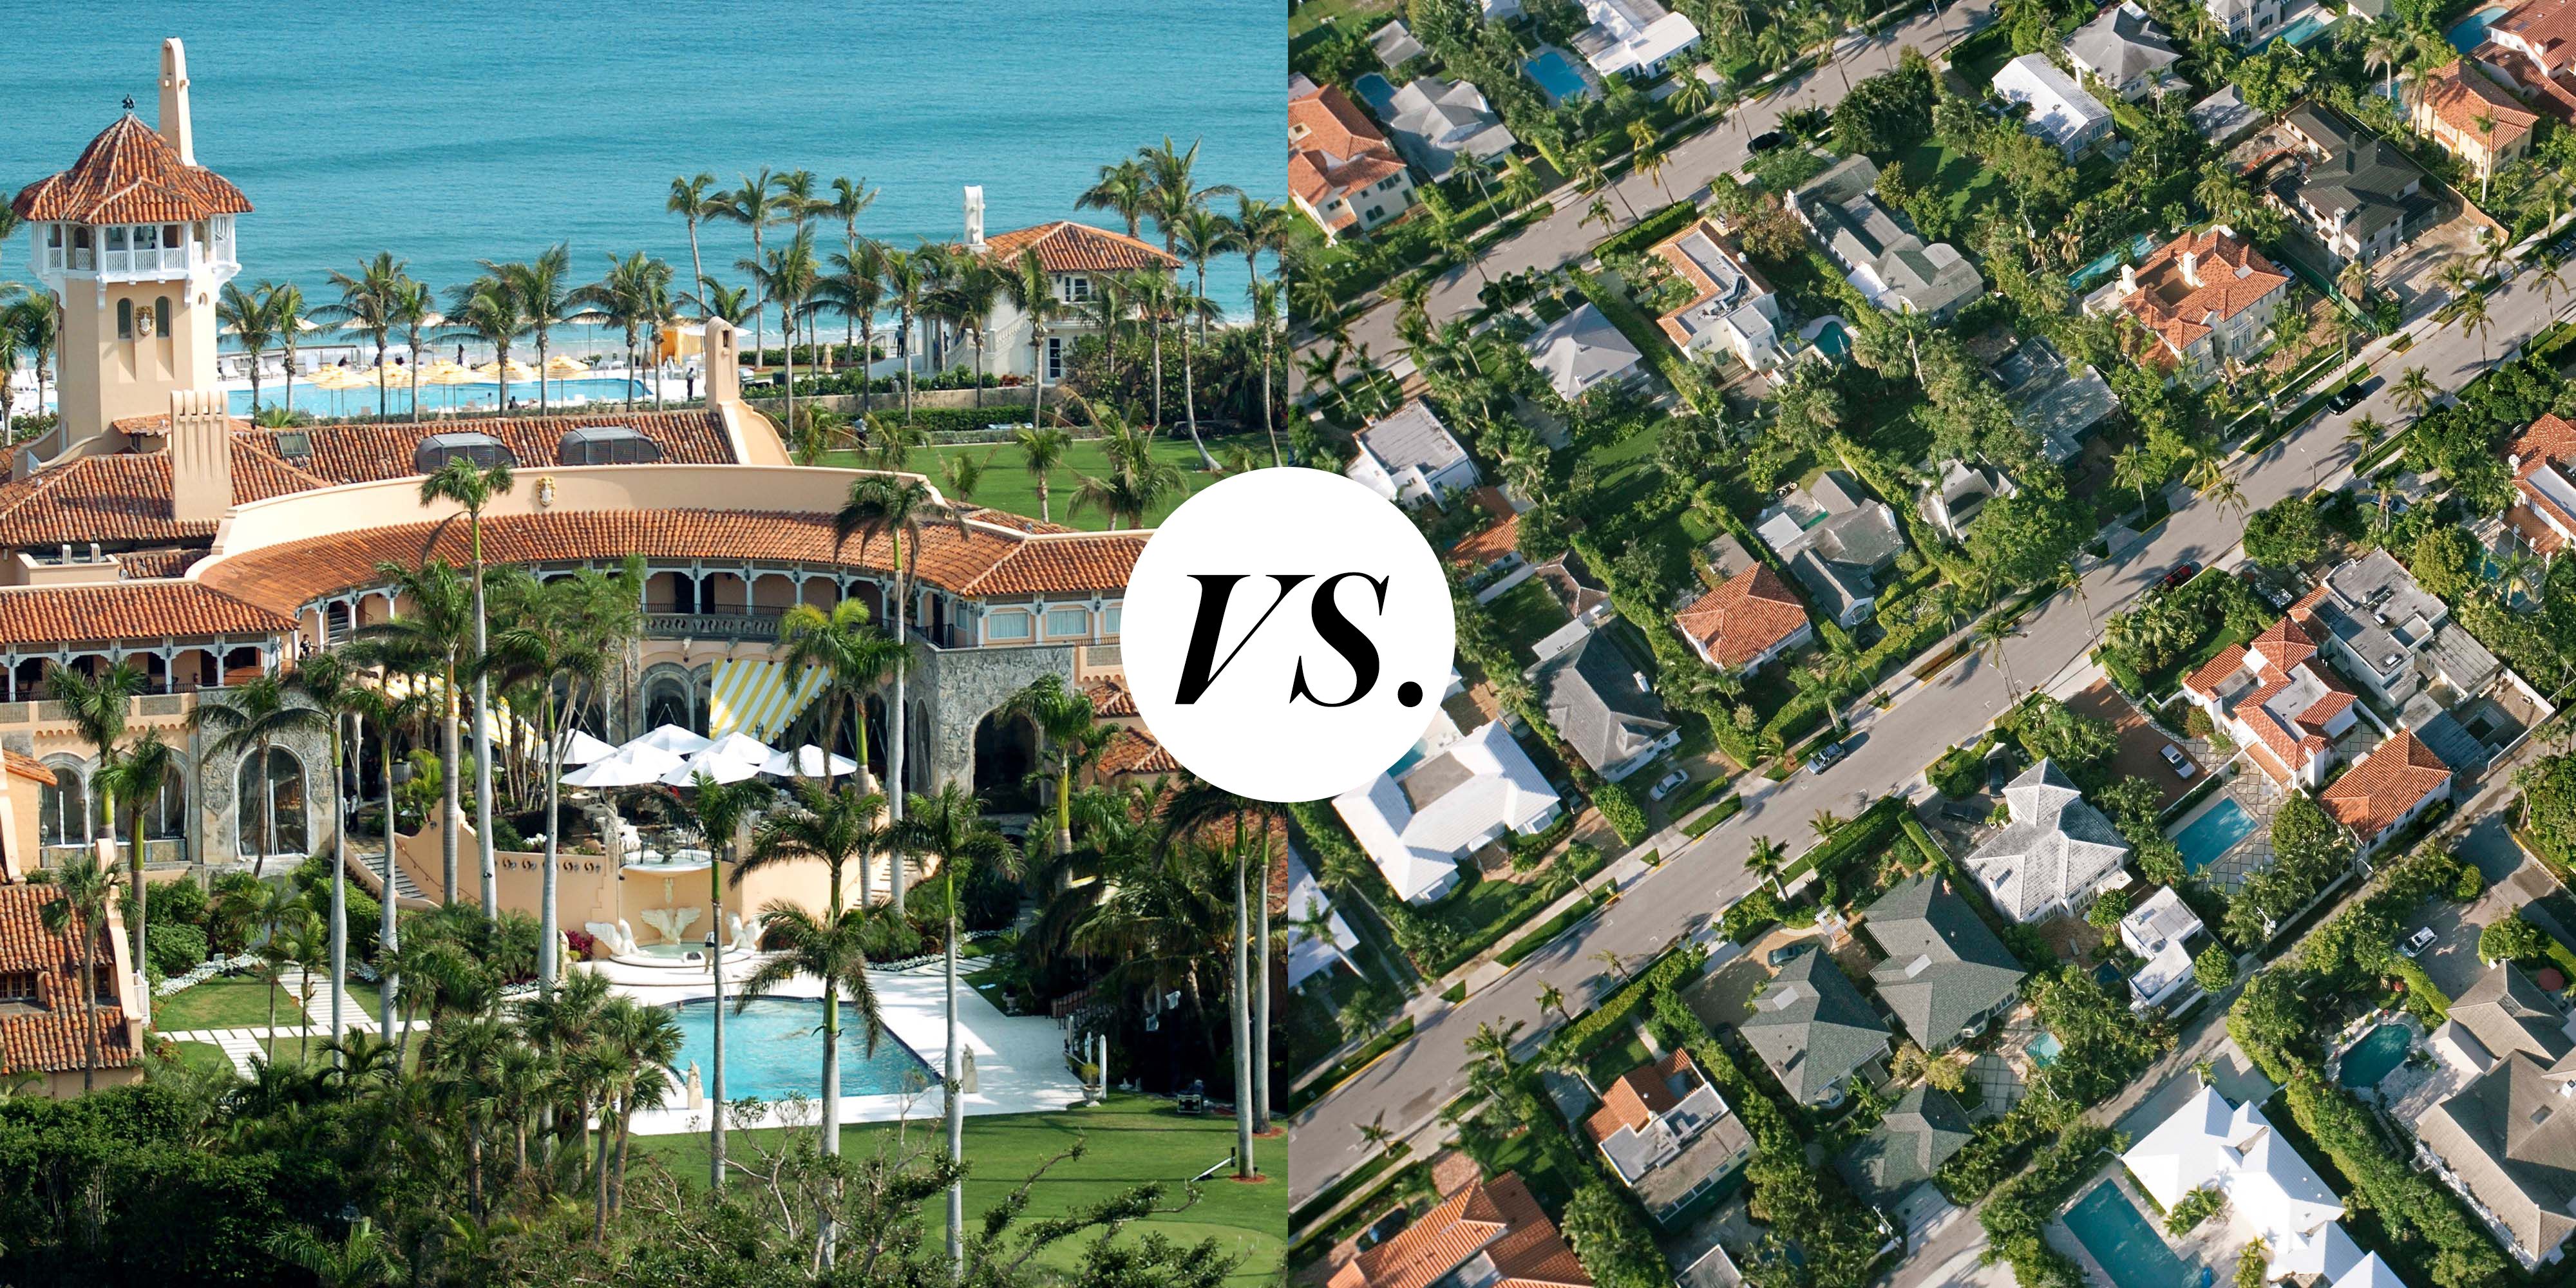 Palm Beach vs. West Palm Beach - Tinsley Mortimer Explains the Difference  Between Palm Beach and WPB